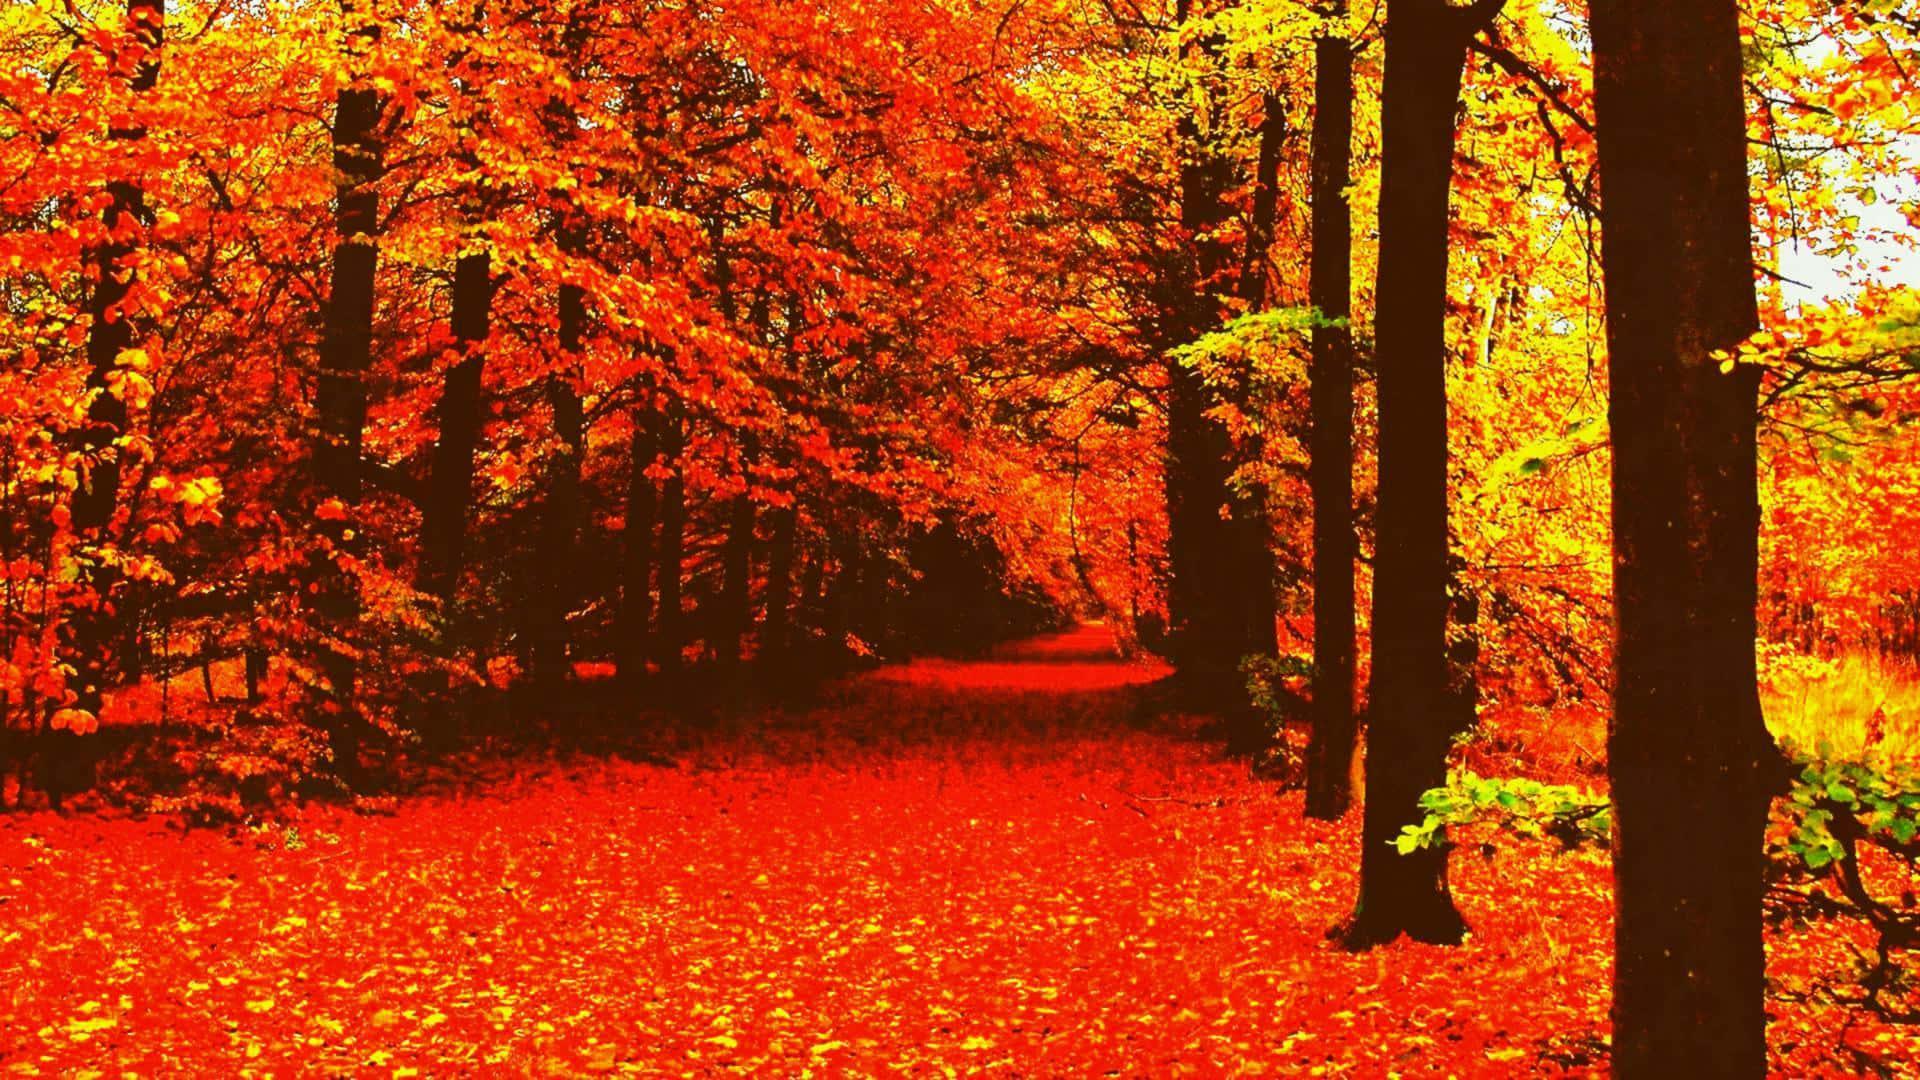 Fall Tumblr Red Leaves Forest Path Wallpaper